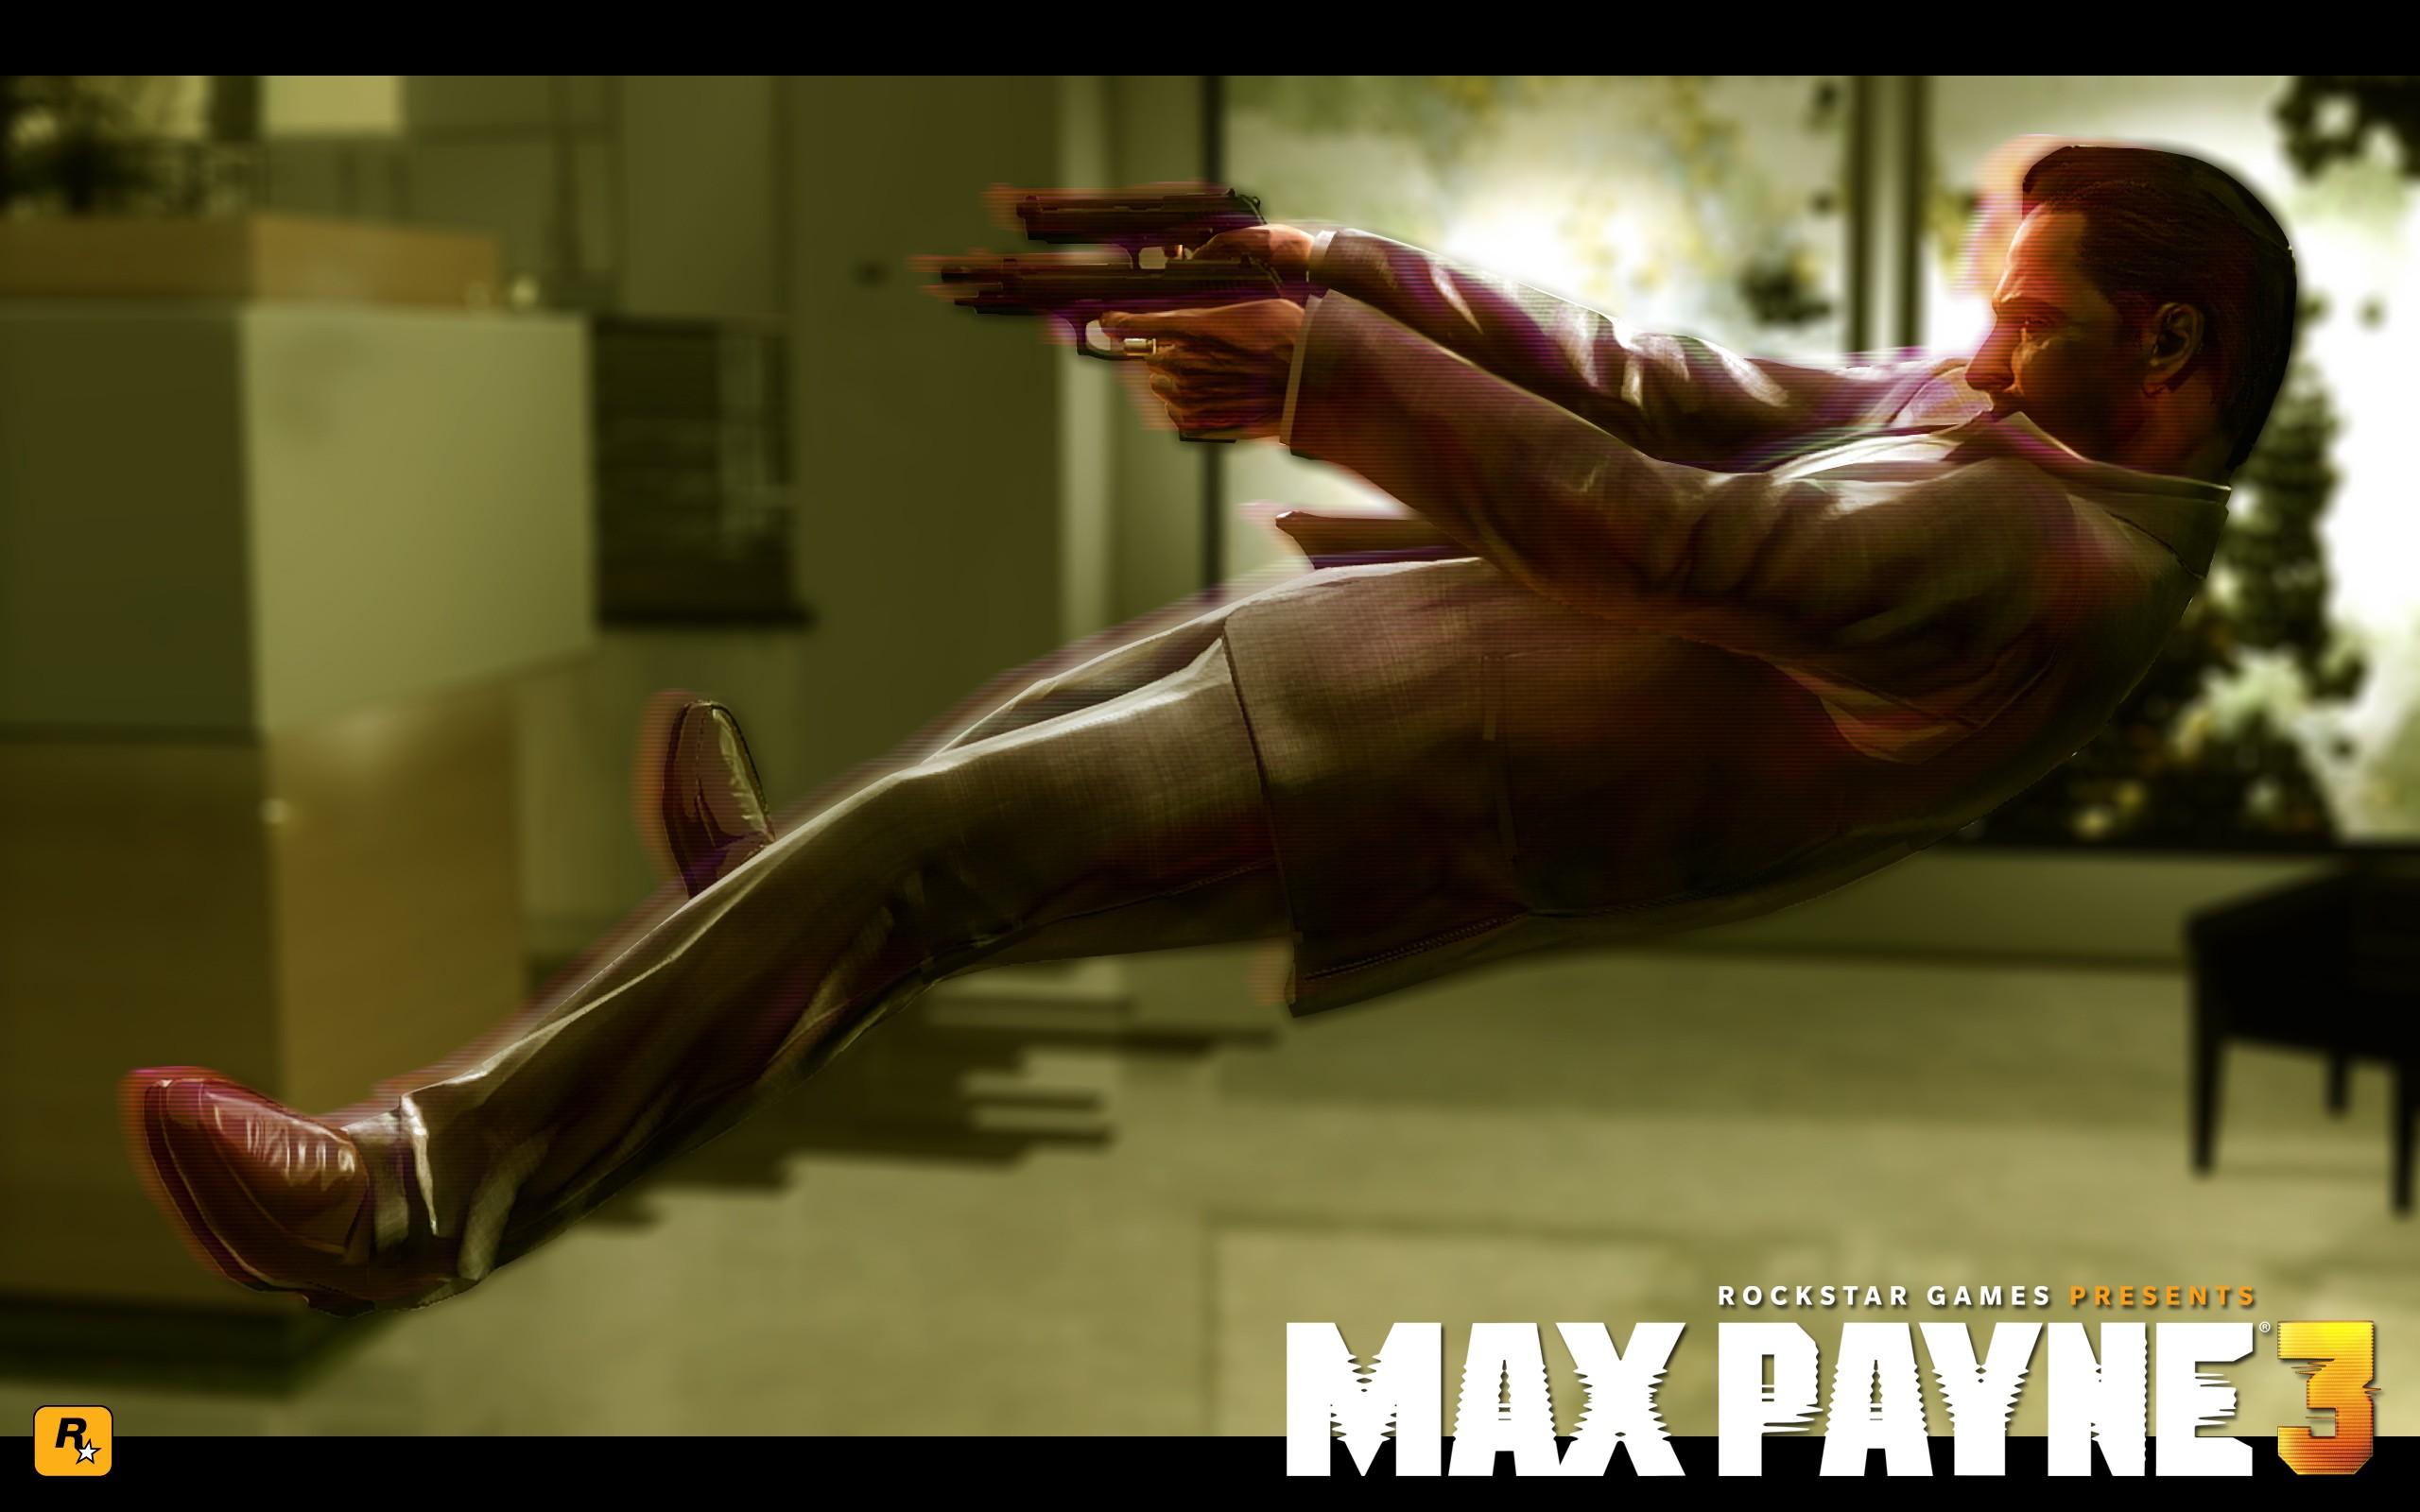 Download the Bullet Time Max Payne Wallpaper, Bullet Time Max Payne